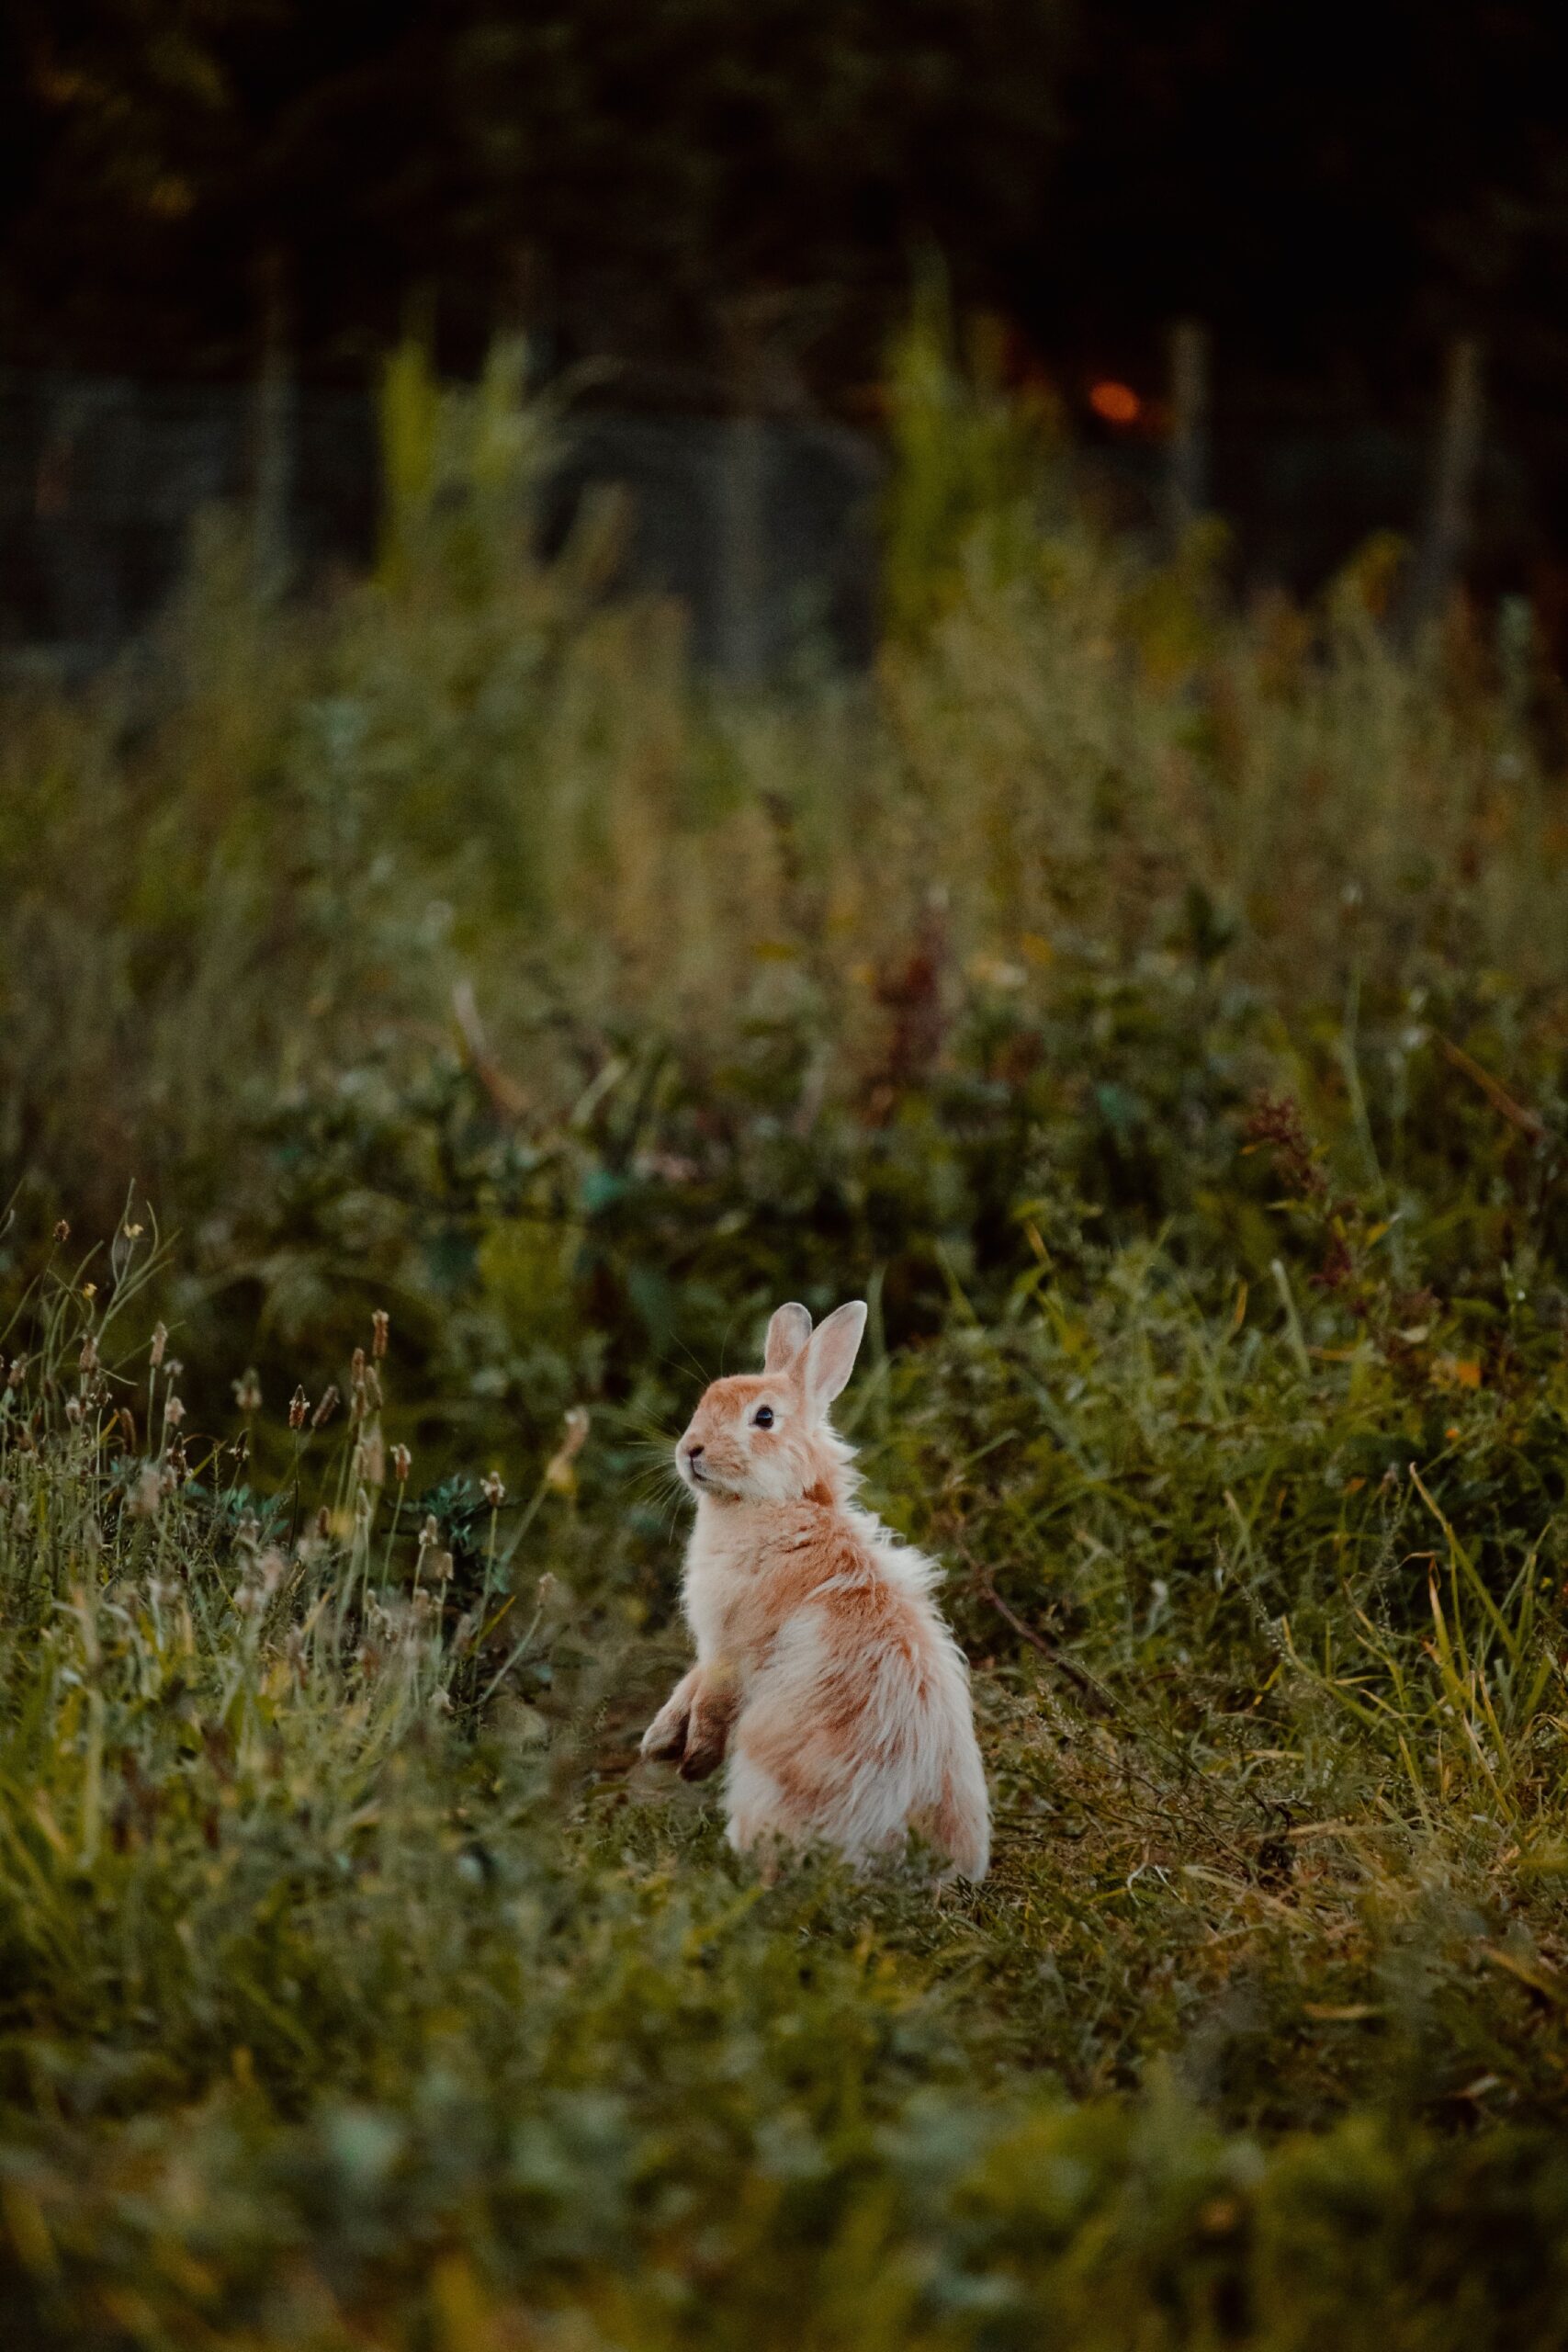 Domestic rabbit photographed to look wild.